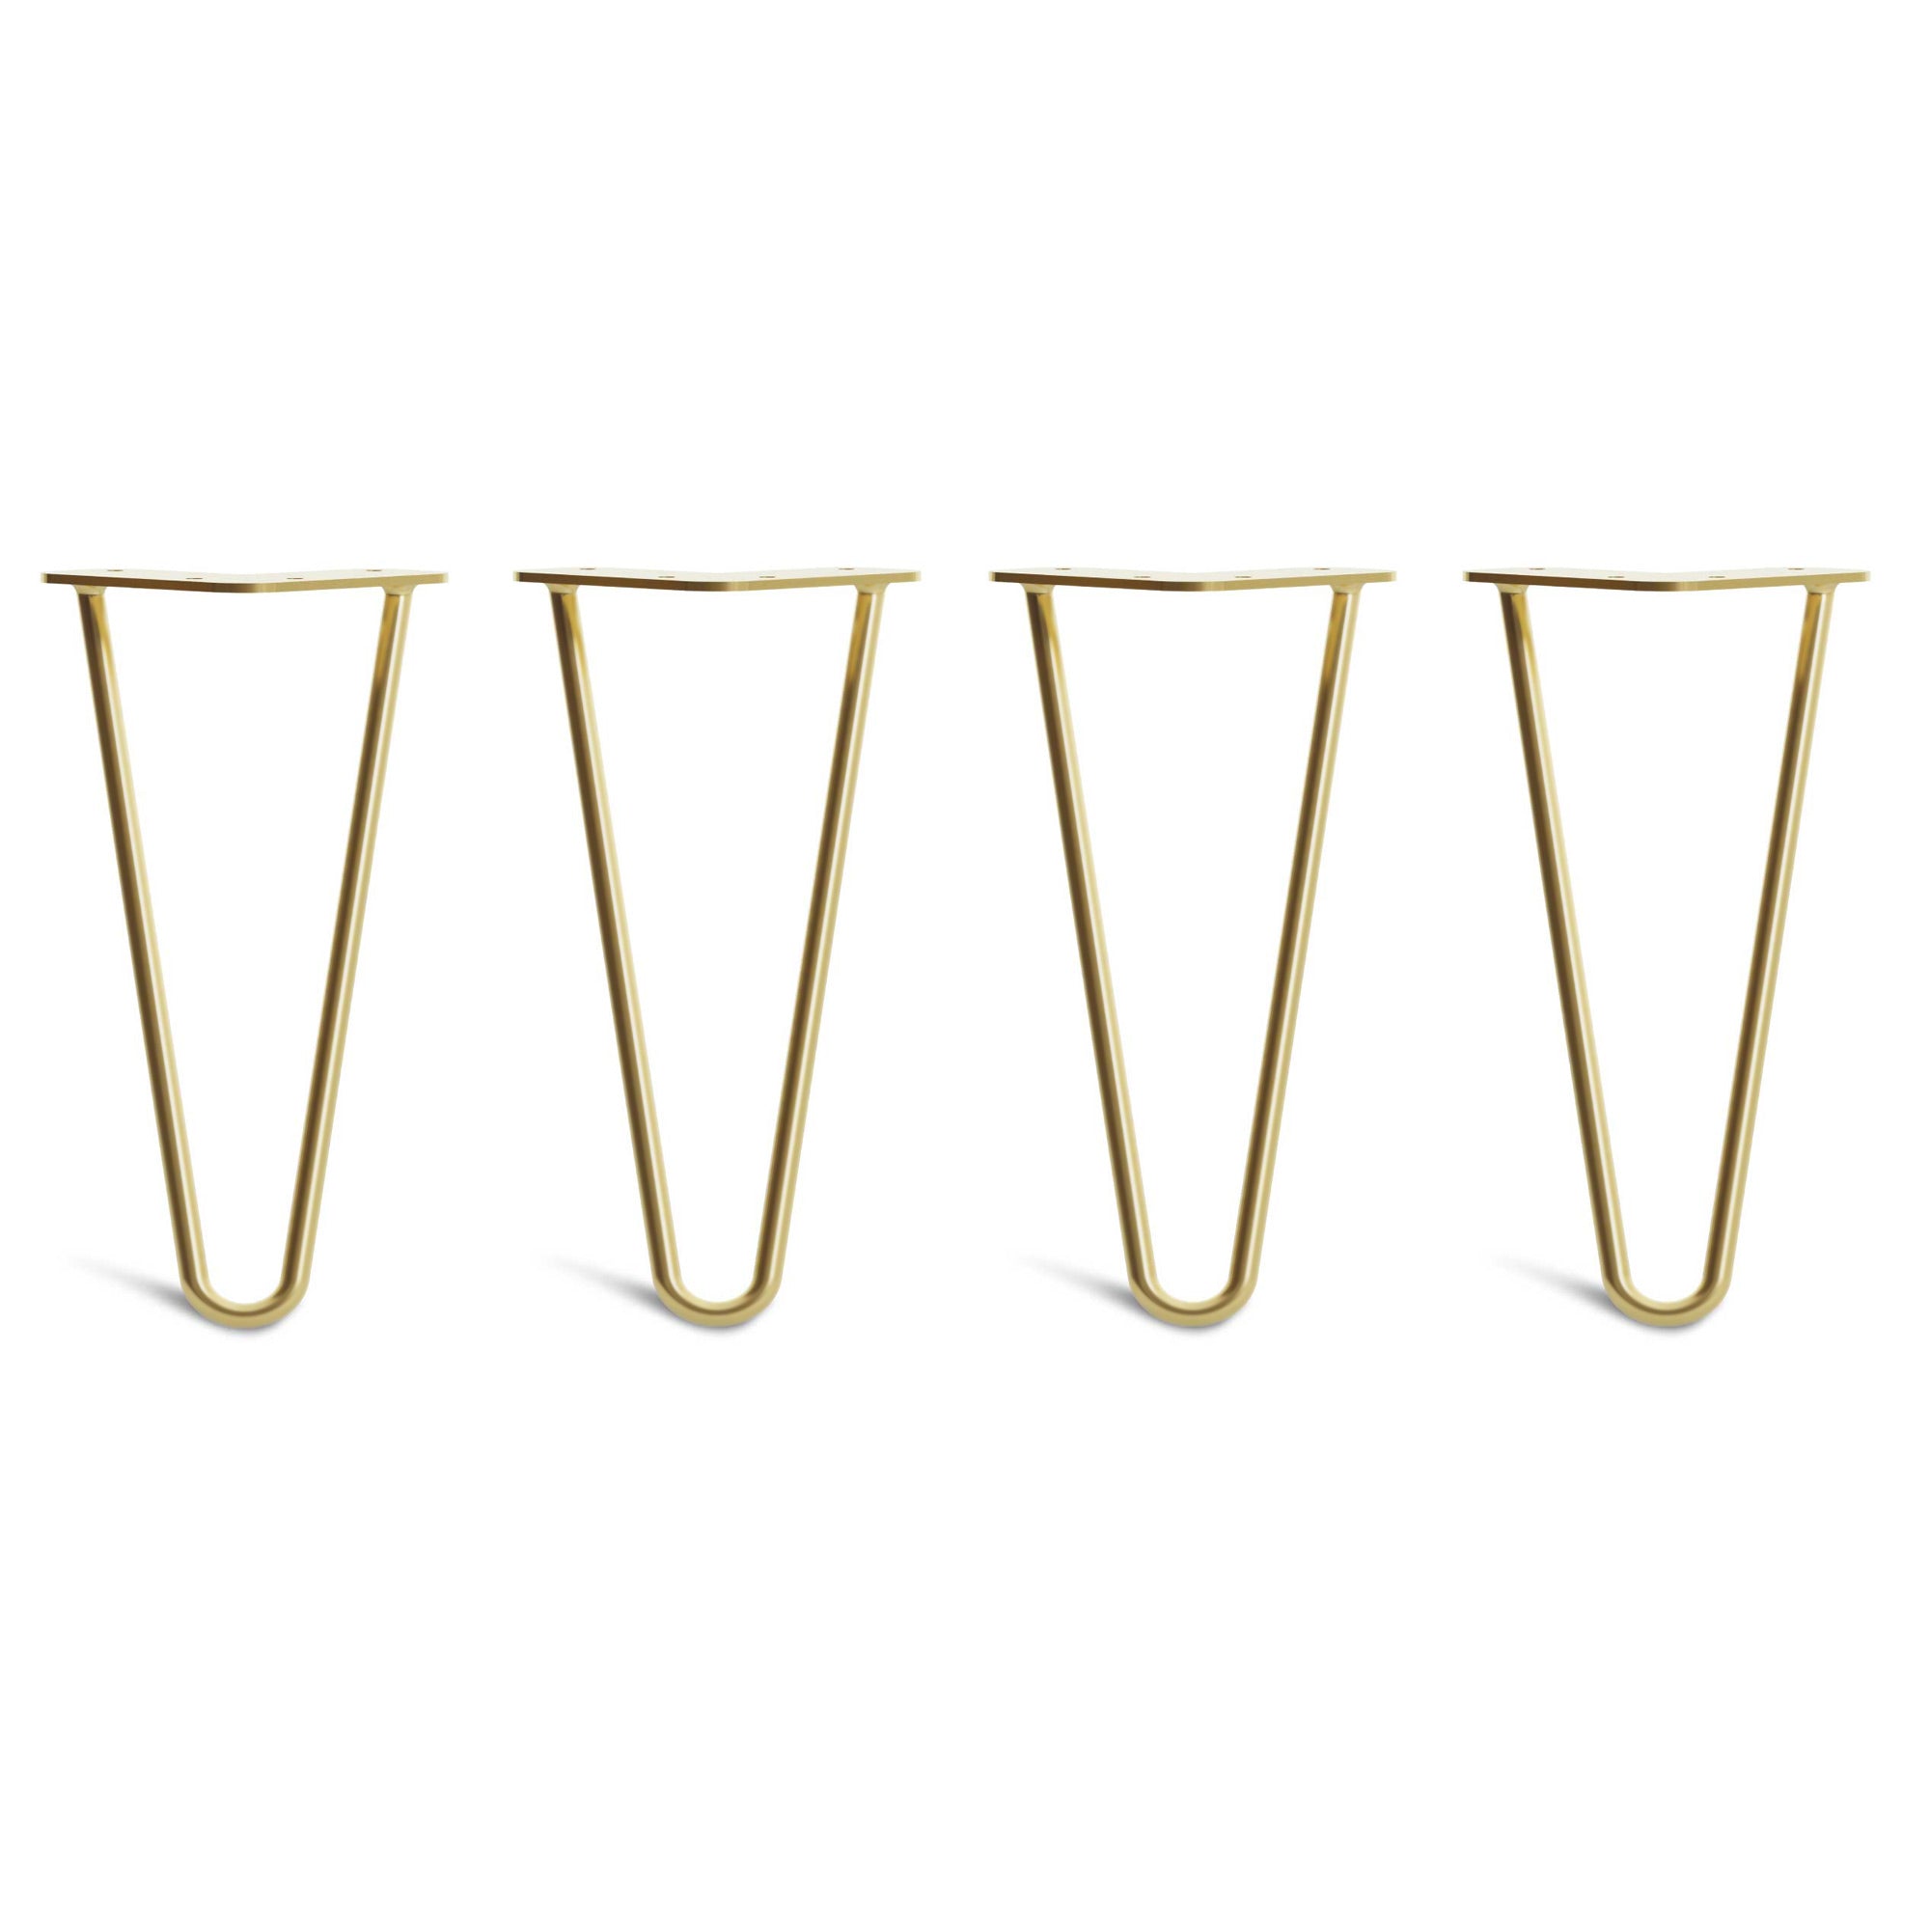 25cm Hairpin Legs - Low Coffee Table-2 Rod-Satin Brass-The Hairpin Leg Co.